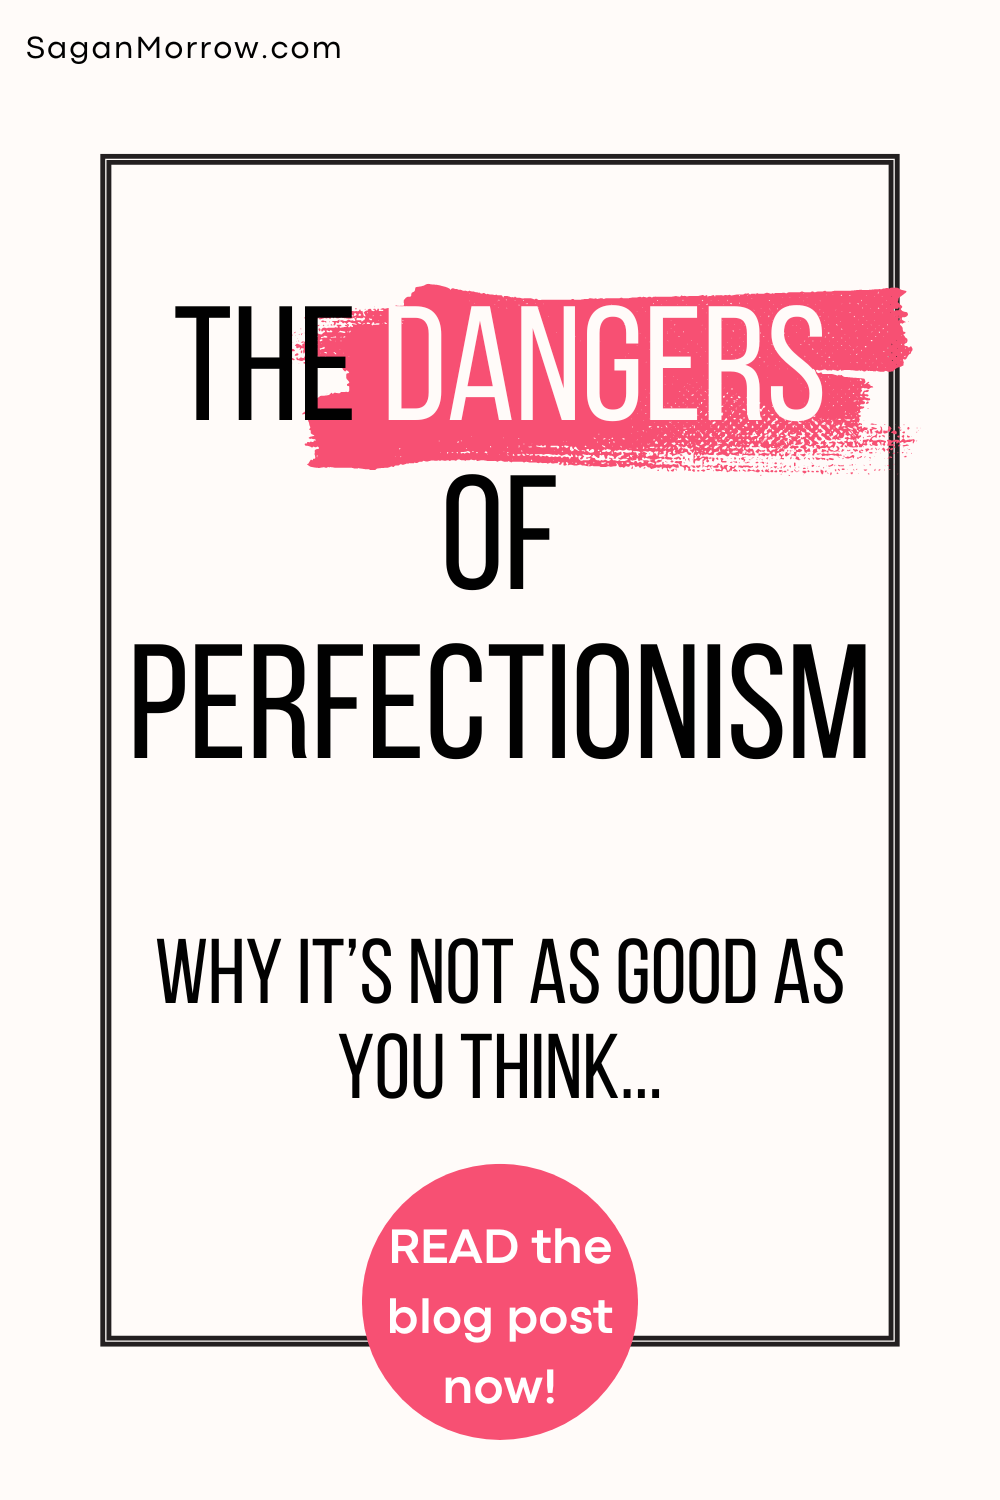 dangers of perfectionism and why perfectionism is not as good as you think